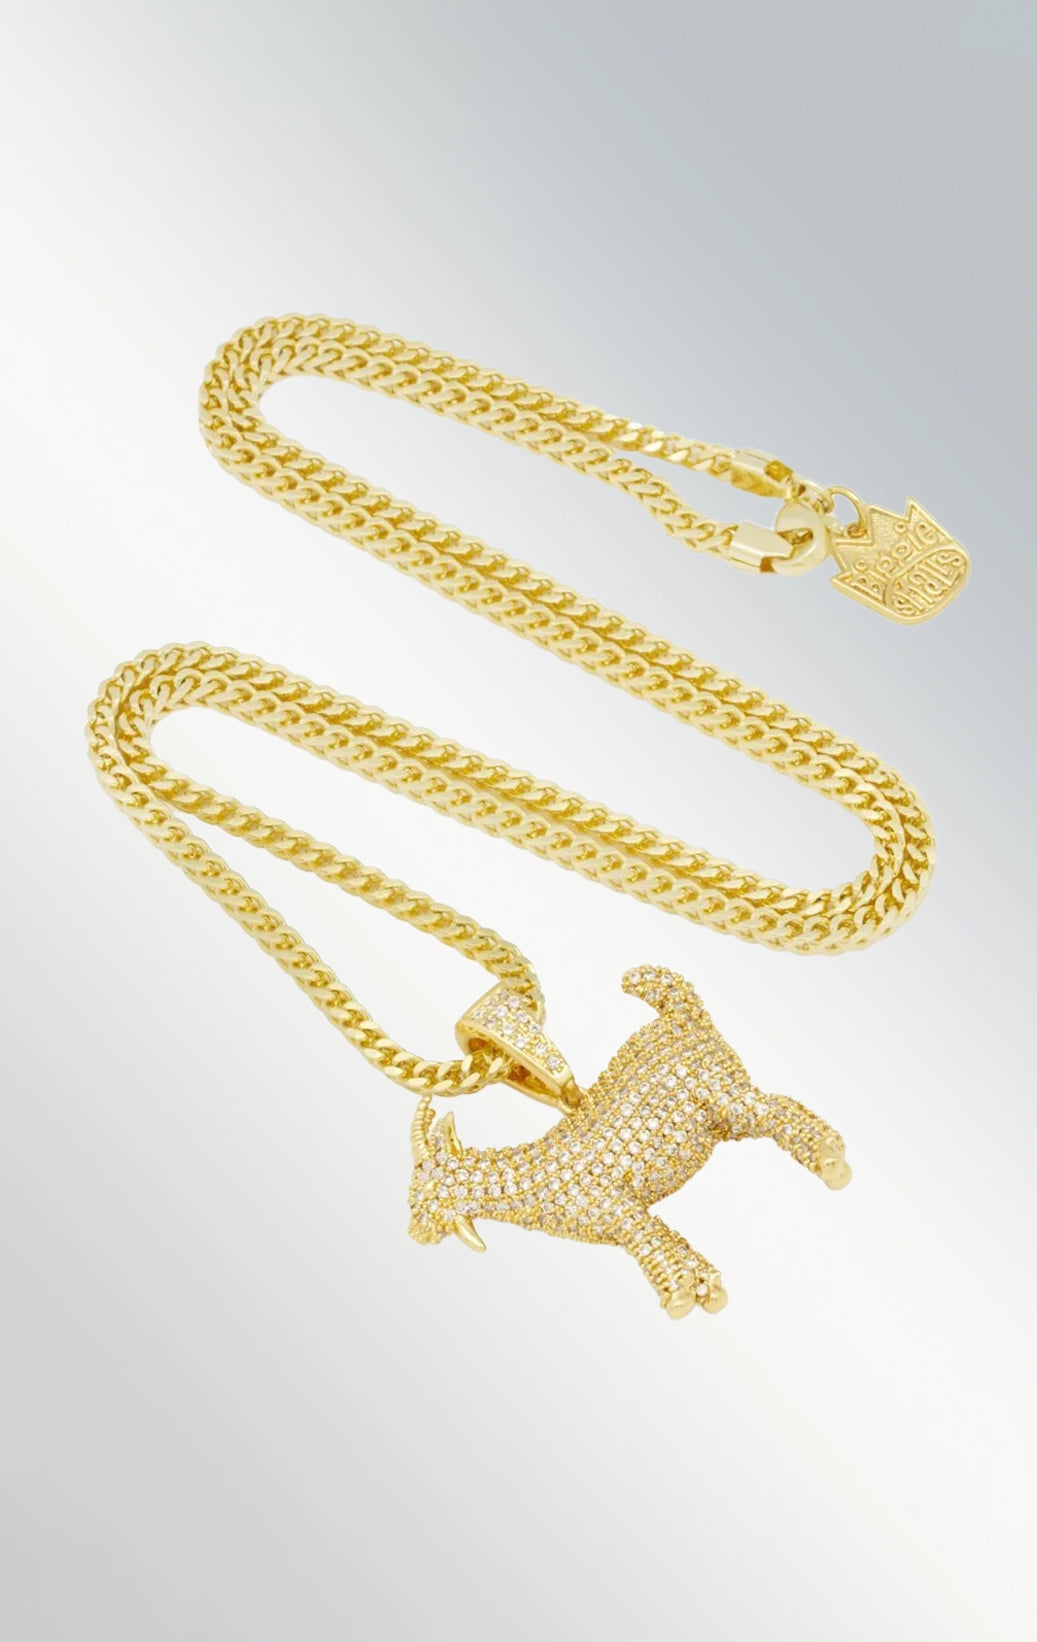 GOAT pendant necklace in gold